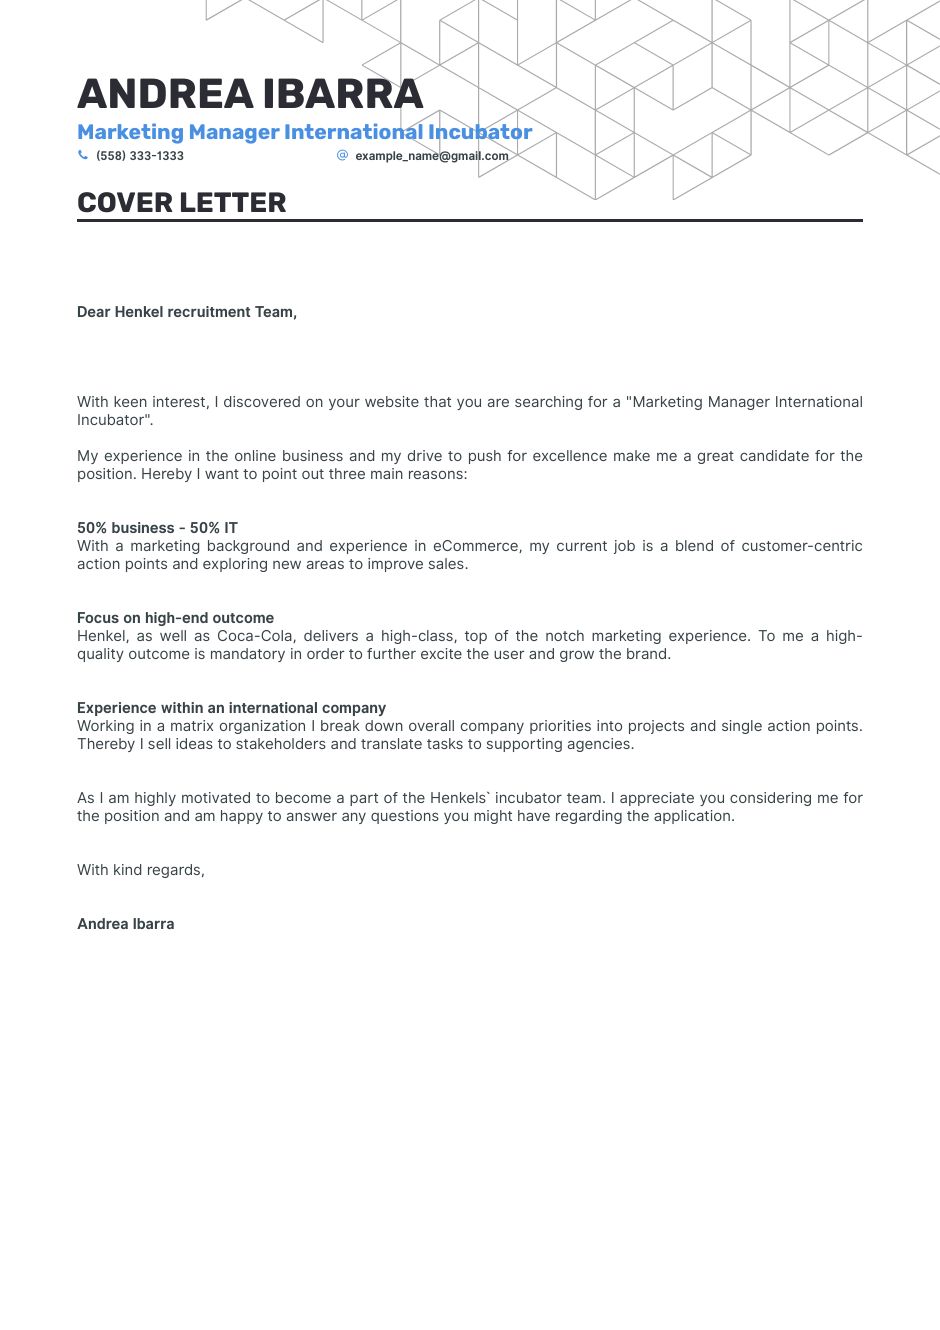 project-manager-coverletter.png